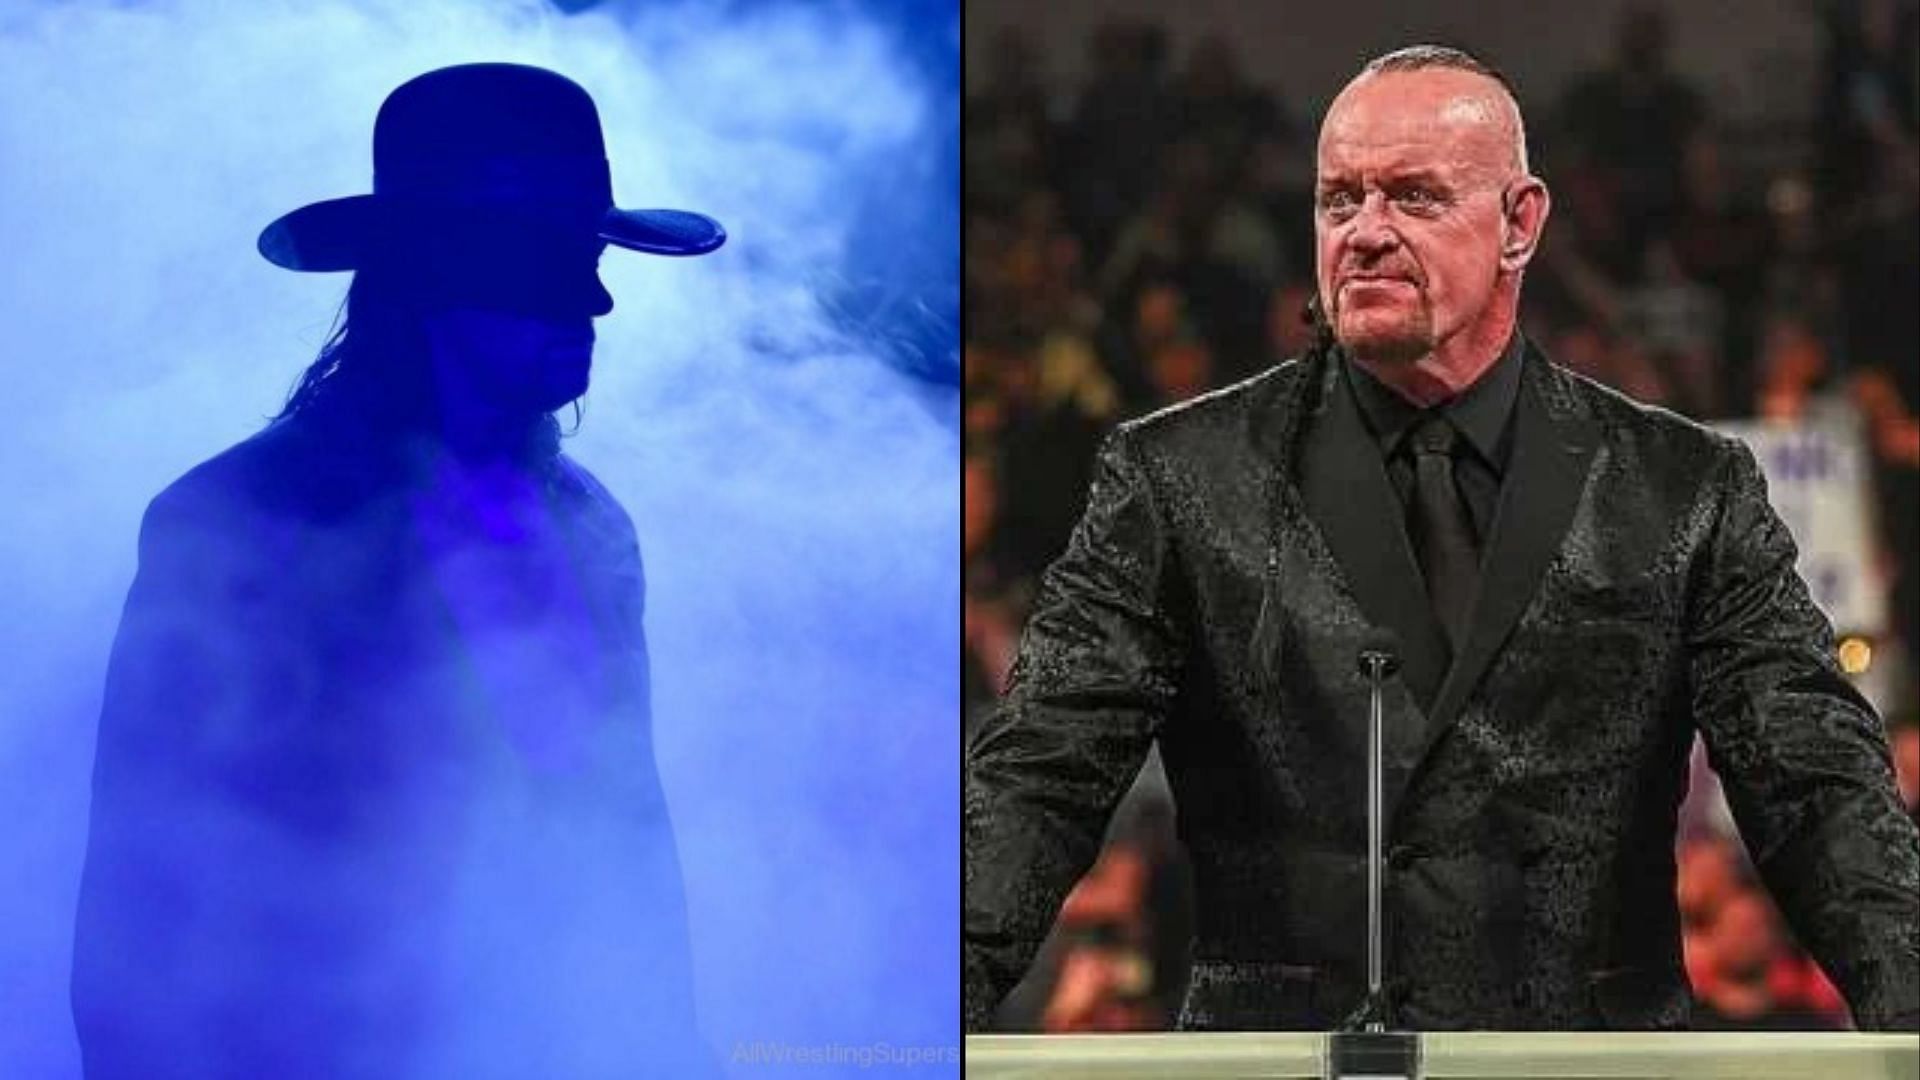 The Undertaker is a WWE veteran who stayed relevant for three decades with variations of The Deadman character